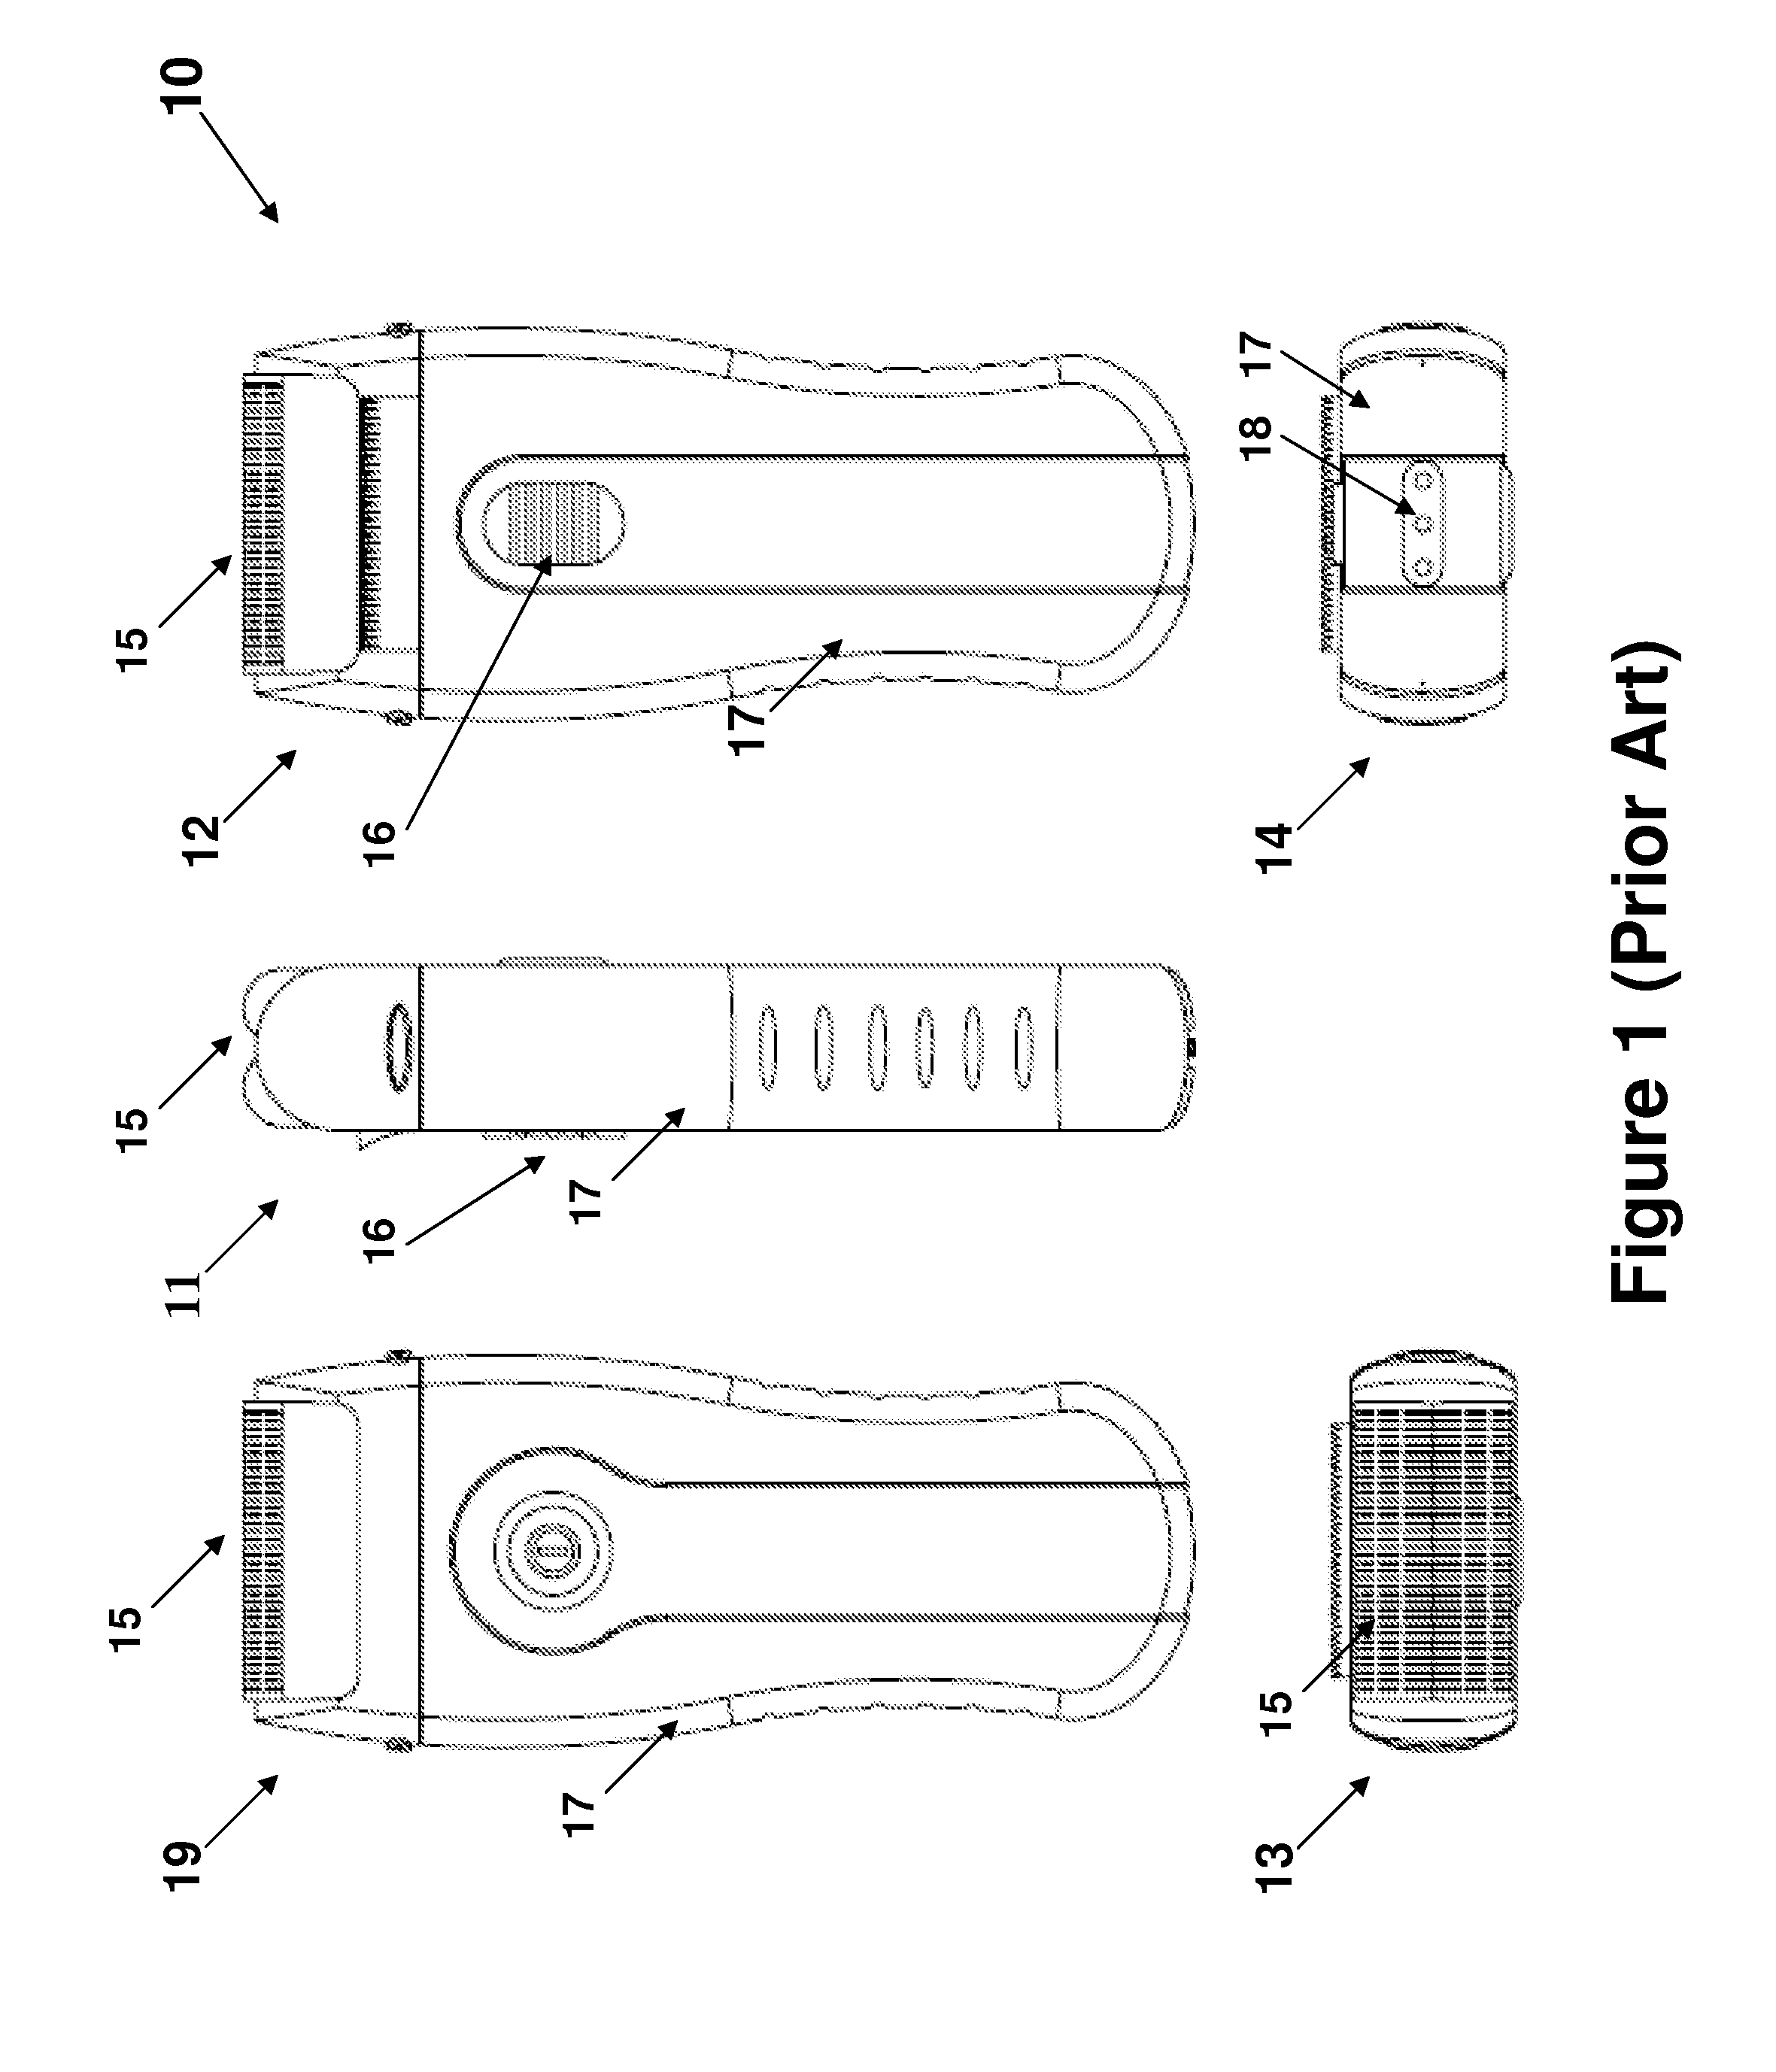 Electric shaver with imaging capability